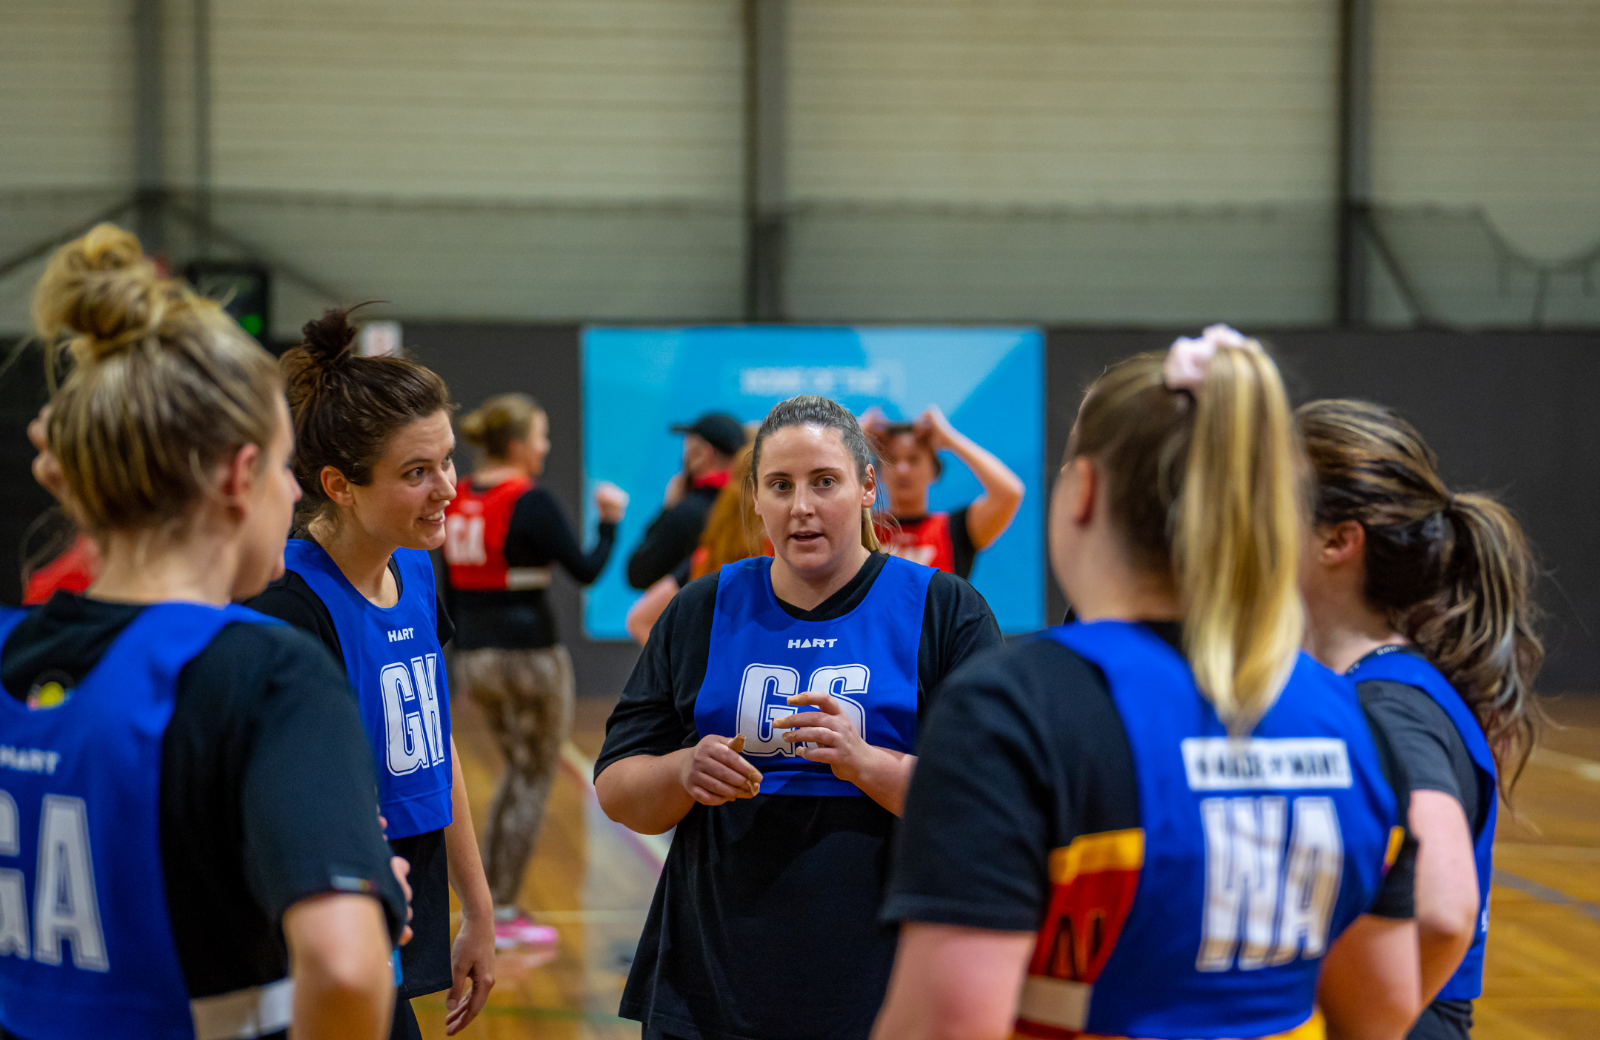 User account deatil for CitySide Sports Social Netball and Social Volleyball comeptitions in Melbourne